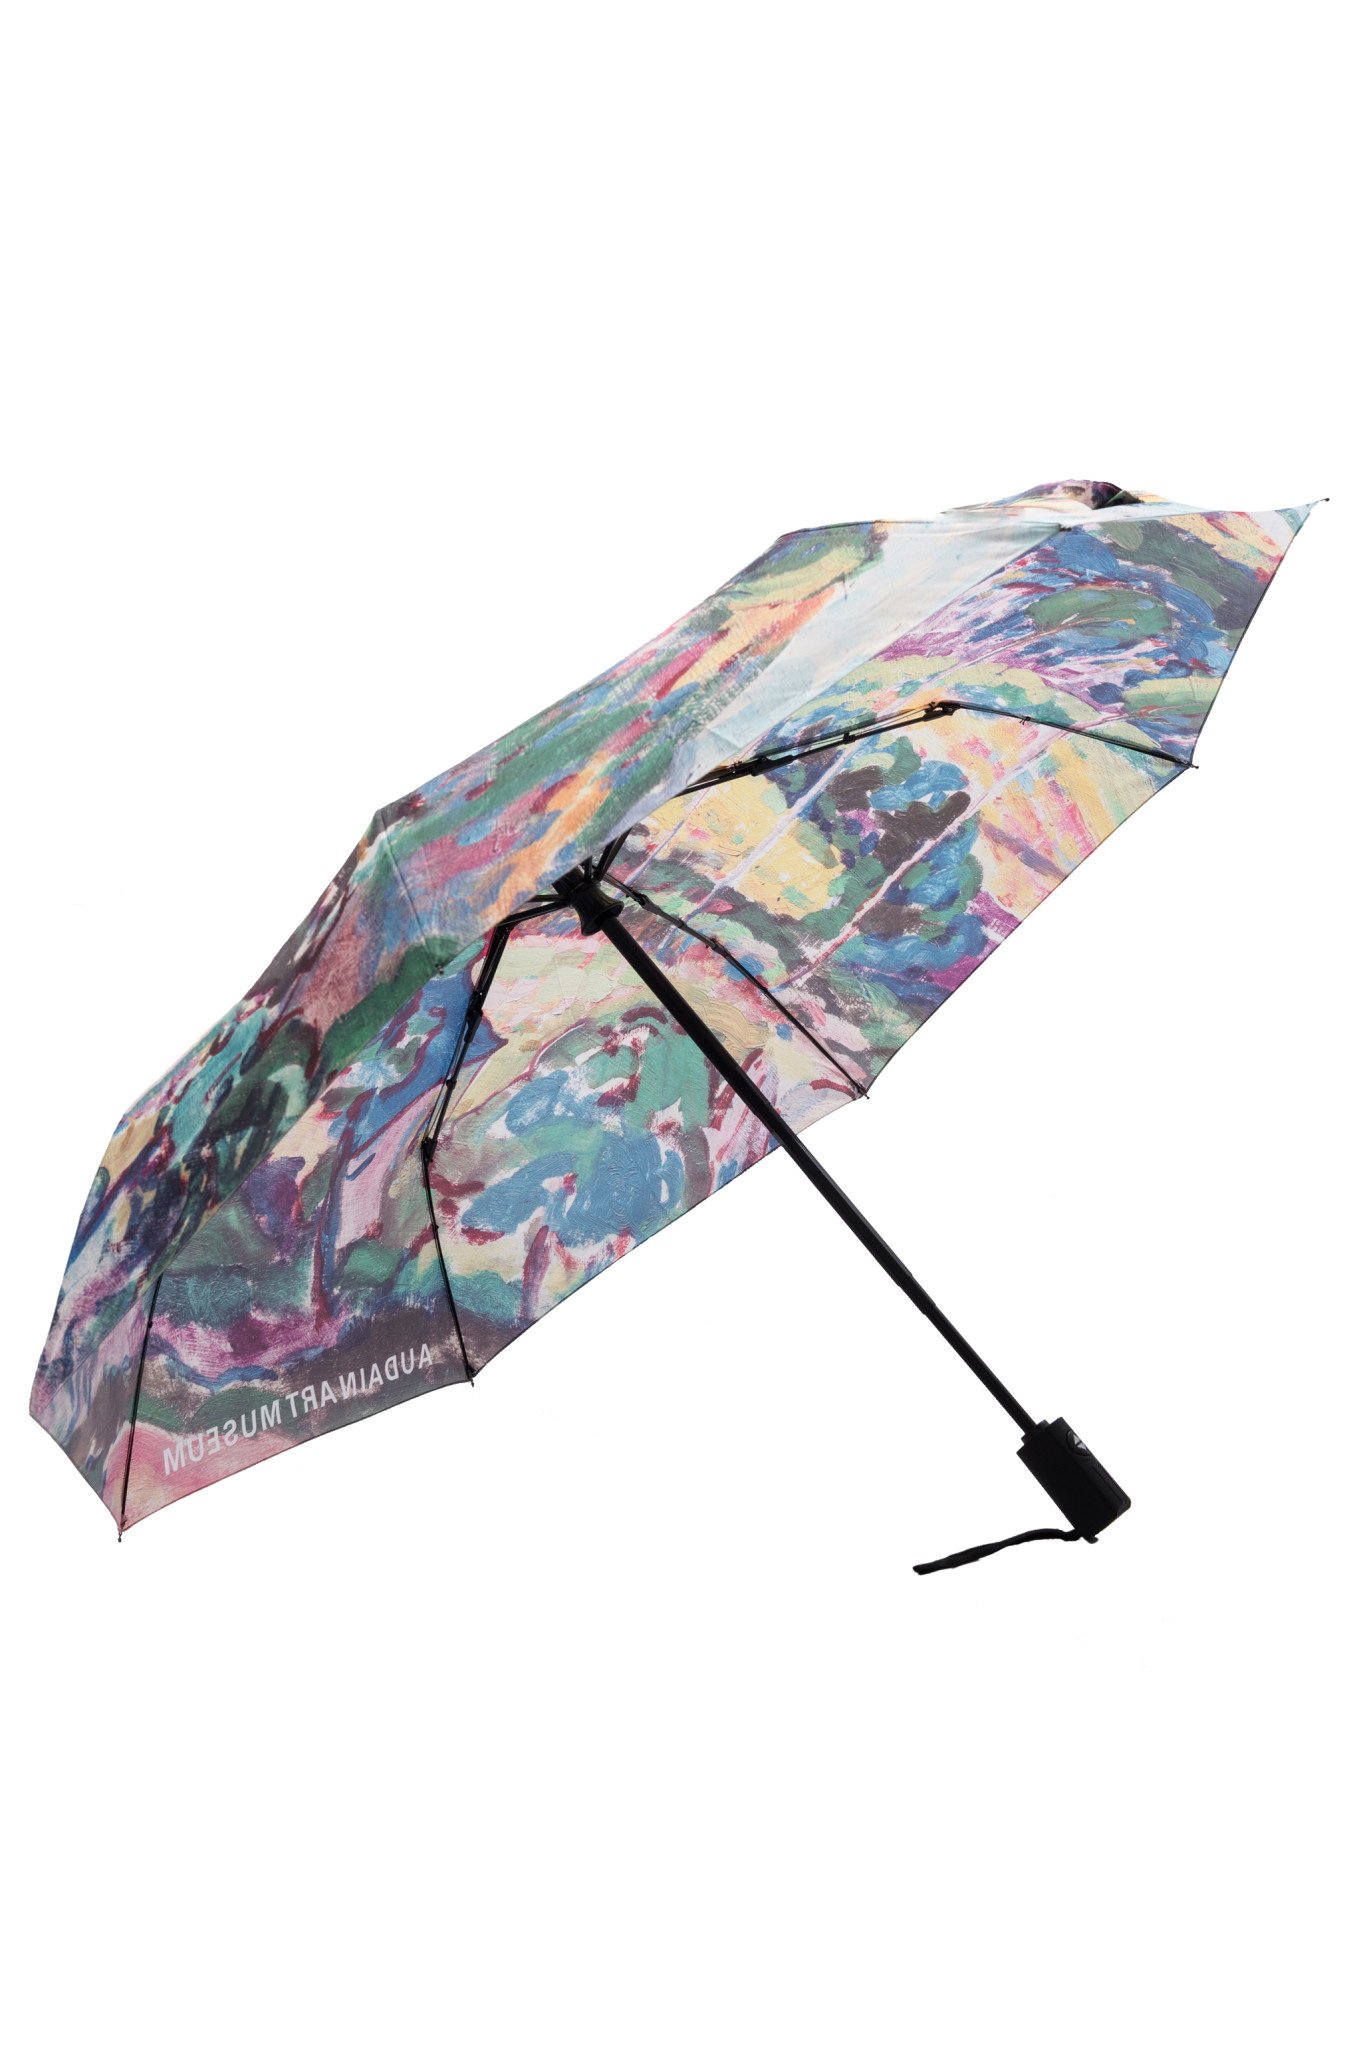 AAM Collection Umbrella - Le Paysage - Emily Carr